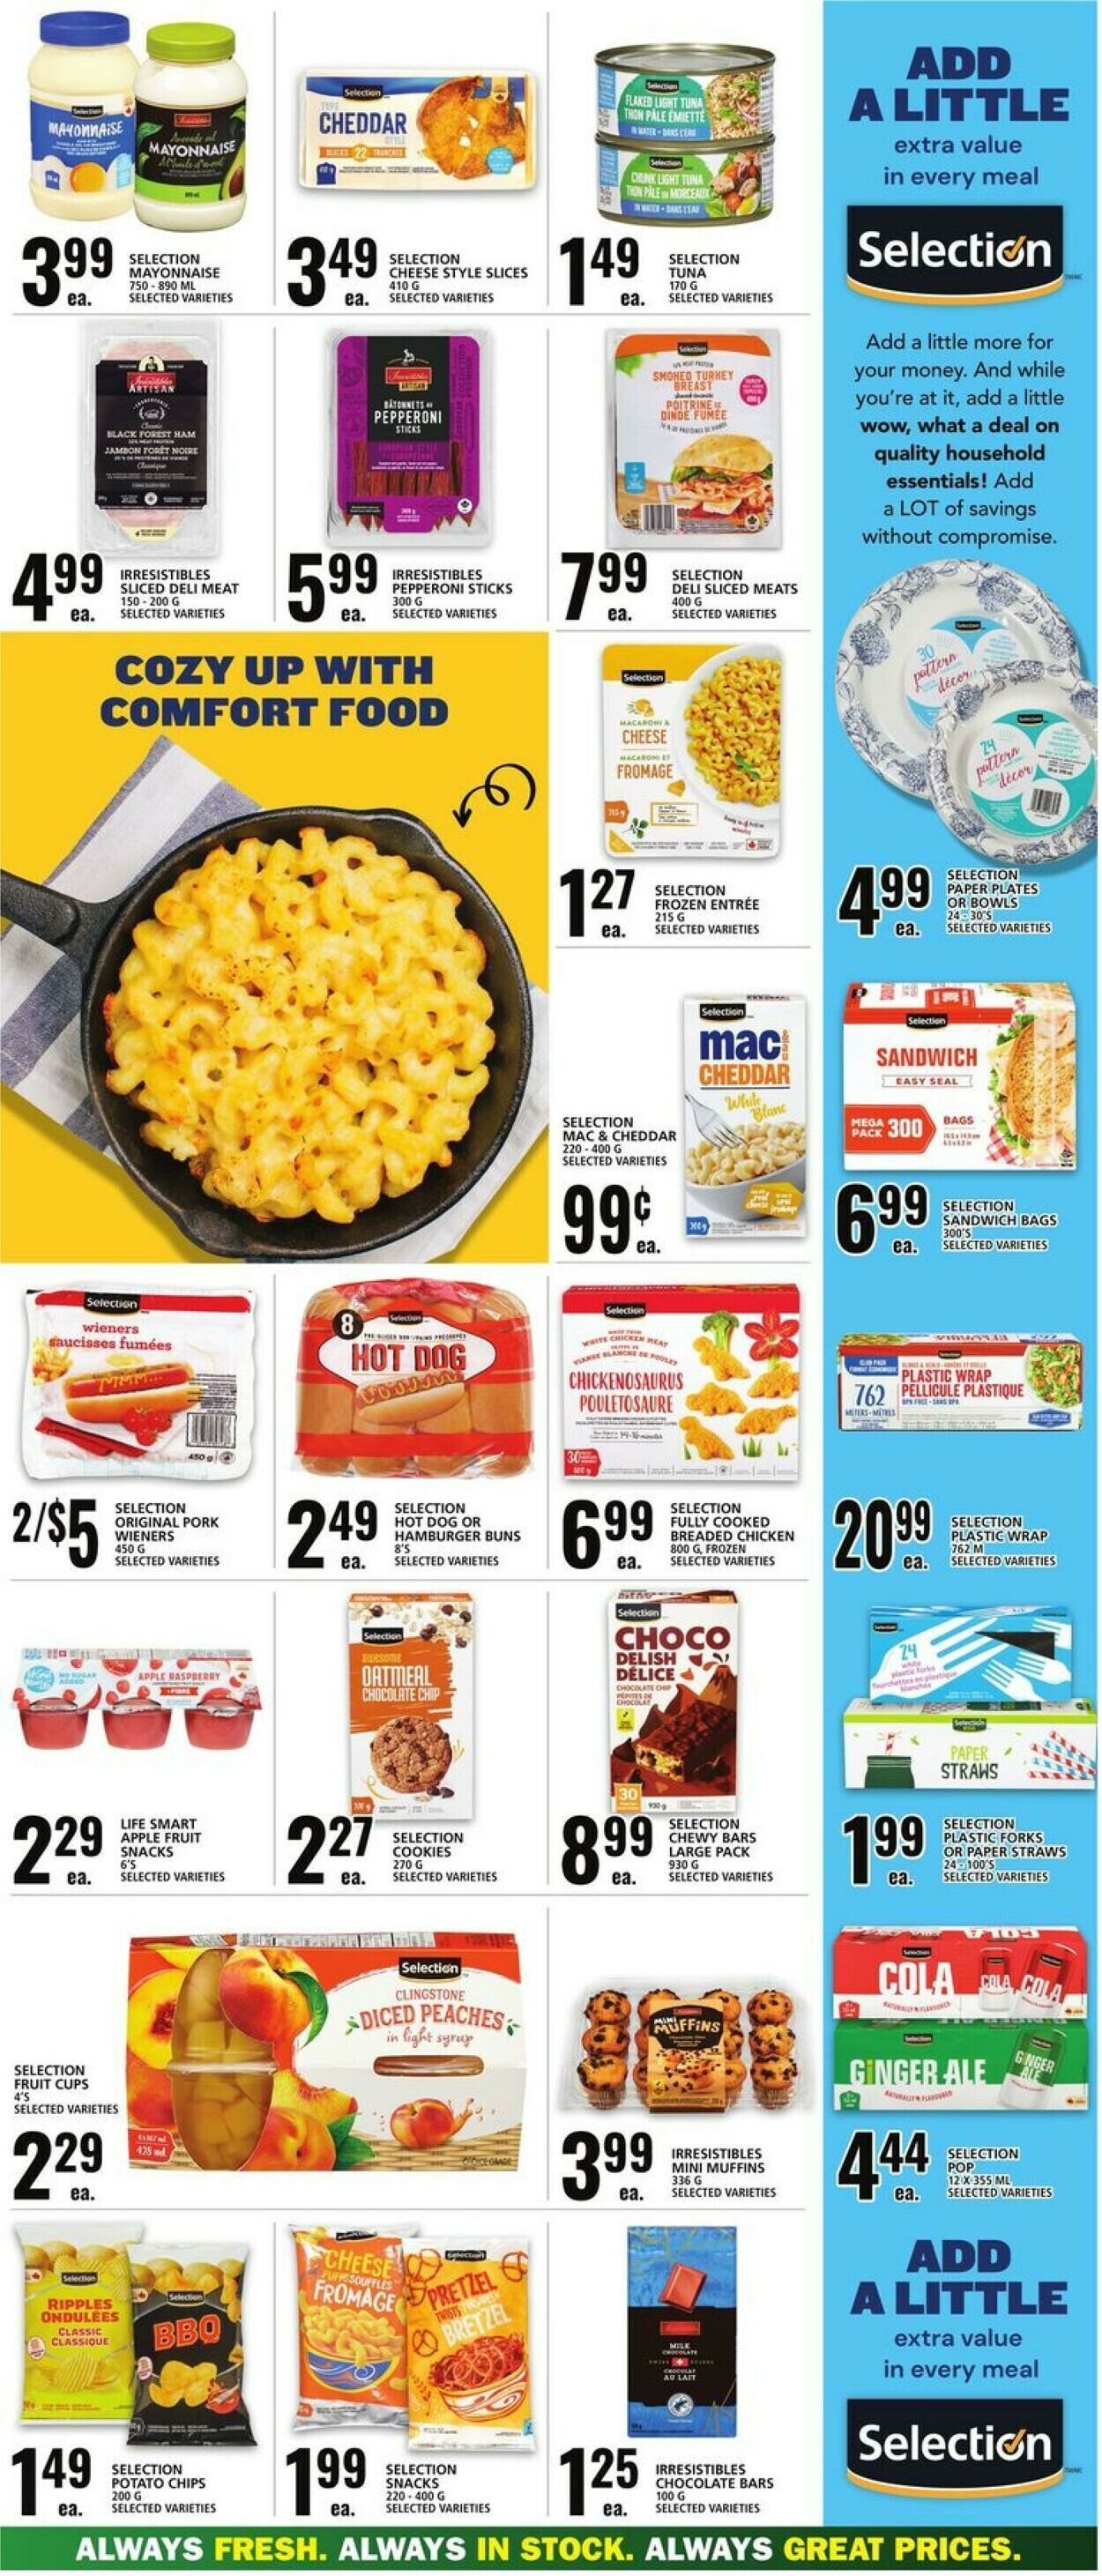 Food Basics Flyer from 08/24/2023